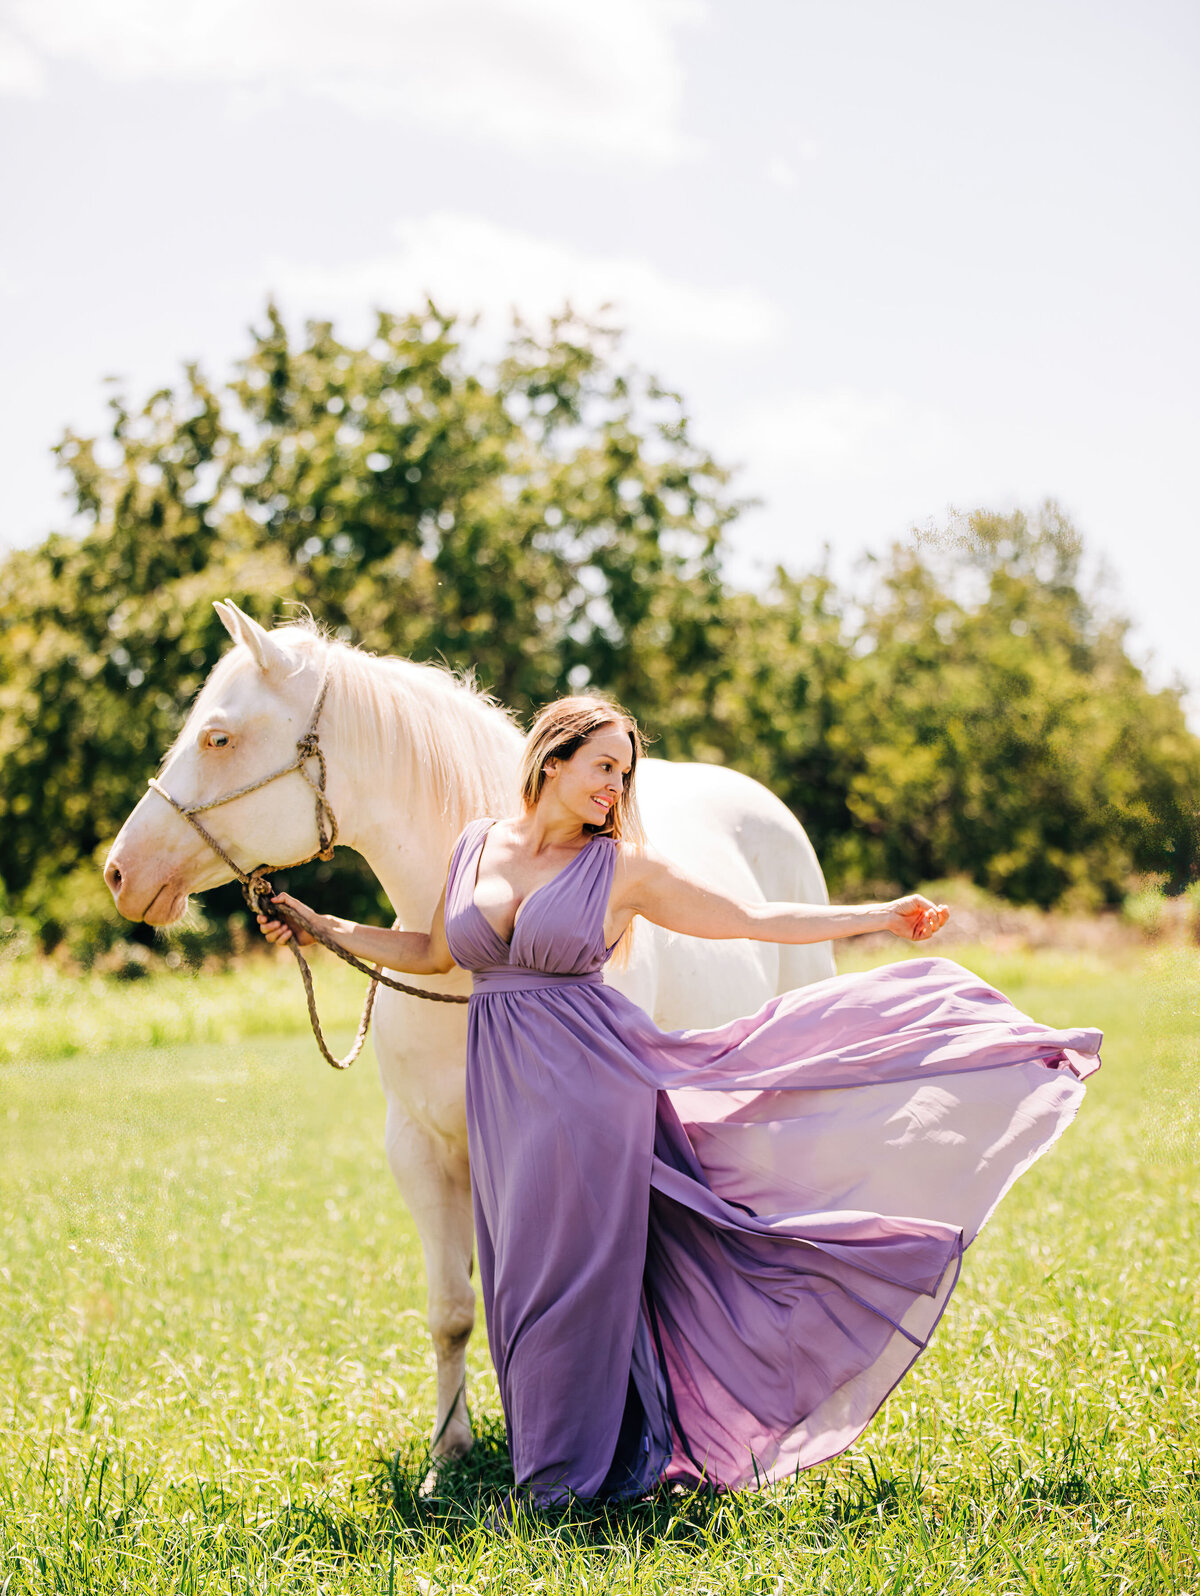 girl in purple dress with cremello horse